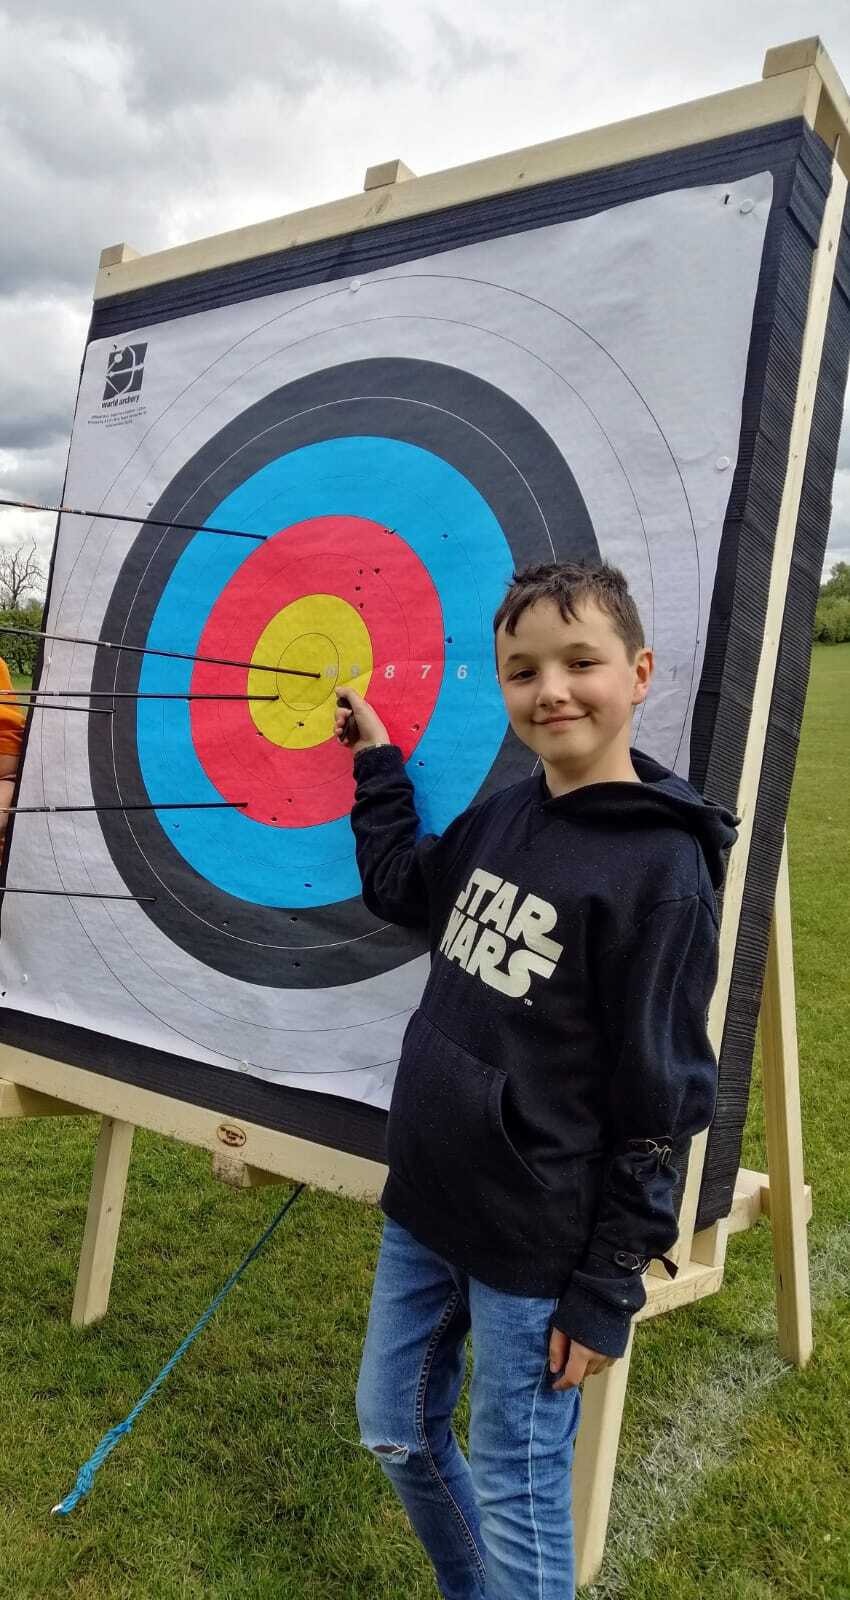 Young boy at archery target